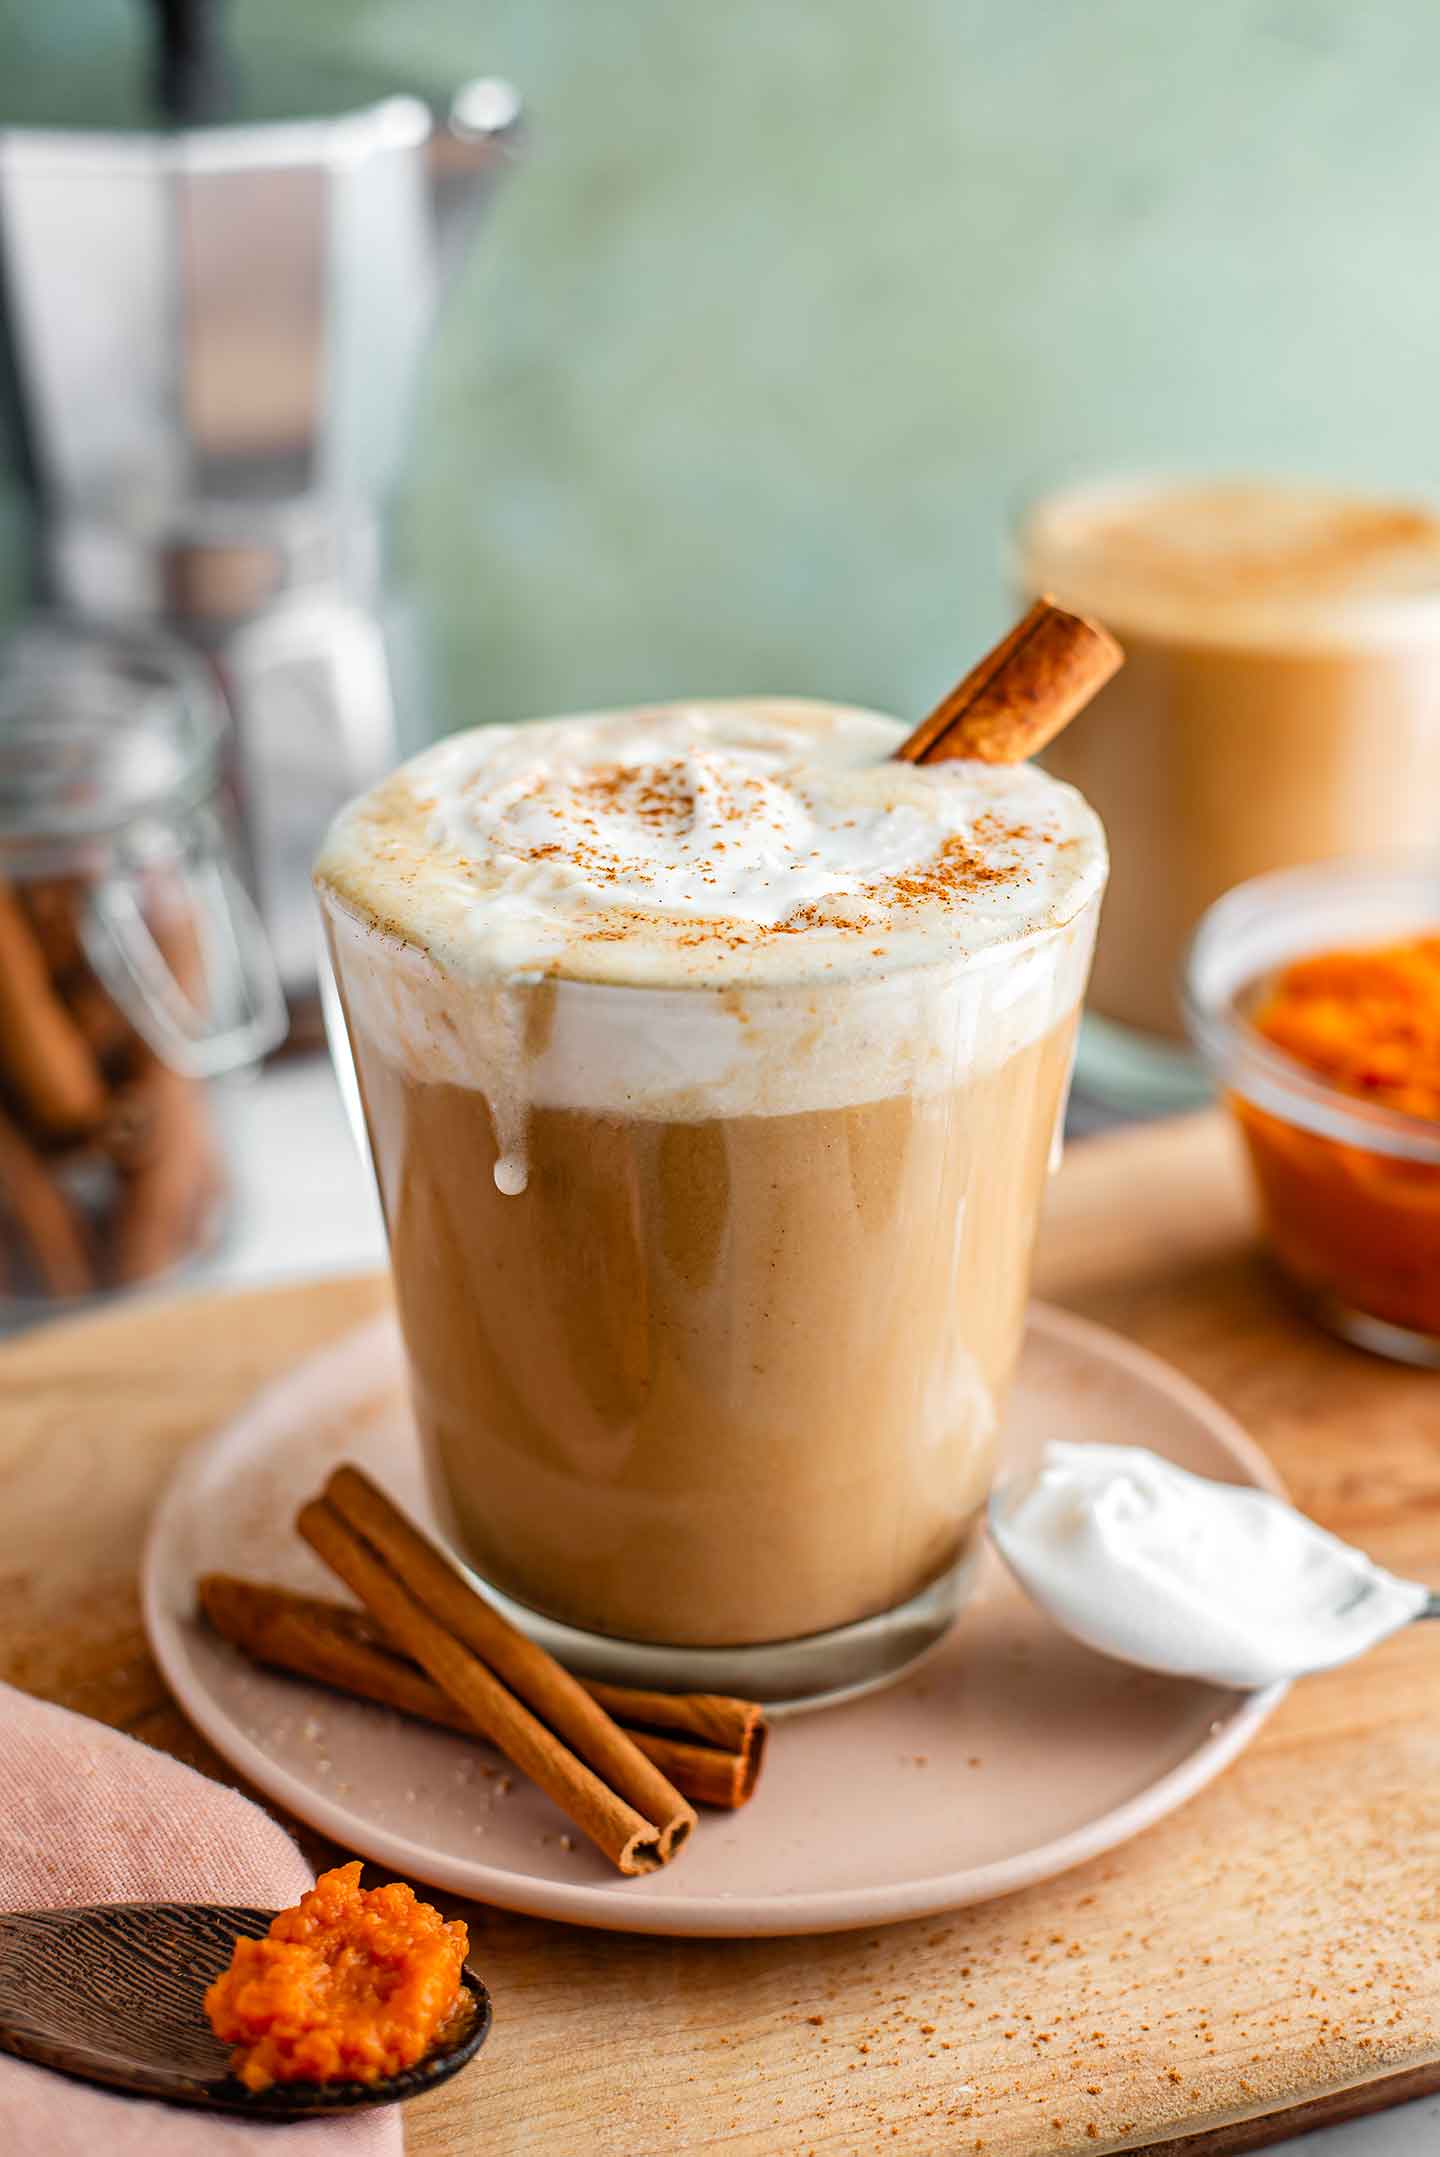 Dairy-free pumpkin spice latte topped with coconut whipped cream fills a glass mug. The whip is dusted with cinnamon and dribbles slightly down the side of the mug. A cinnamon stick rests in the festive latte.